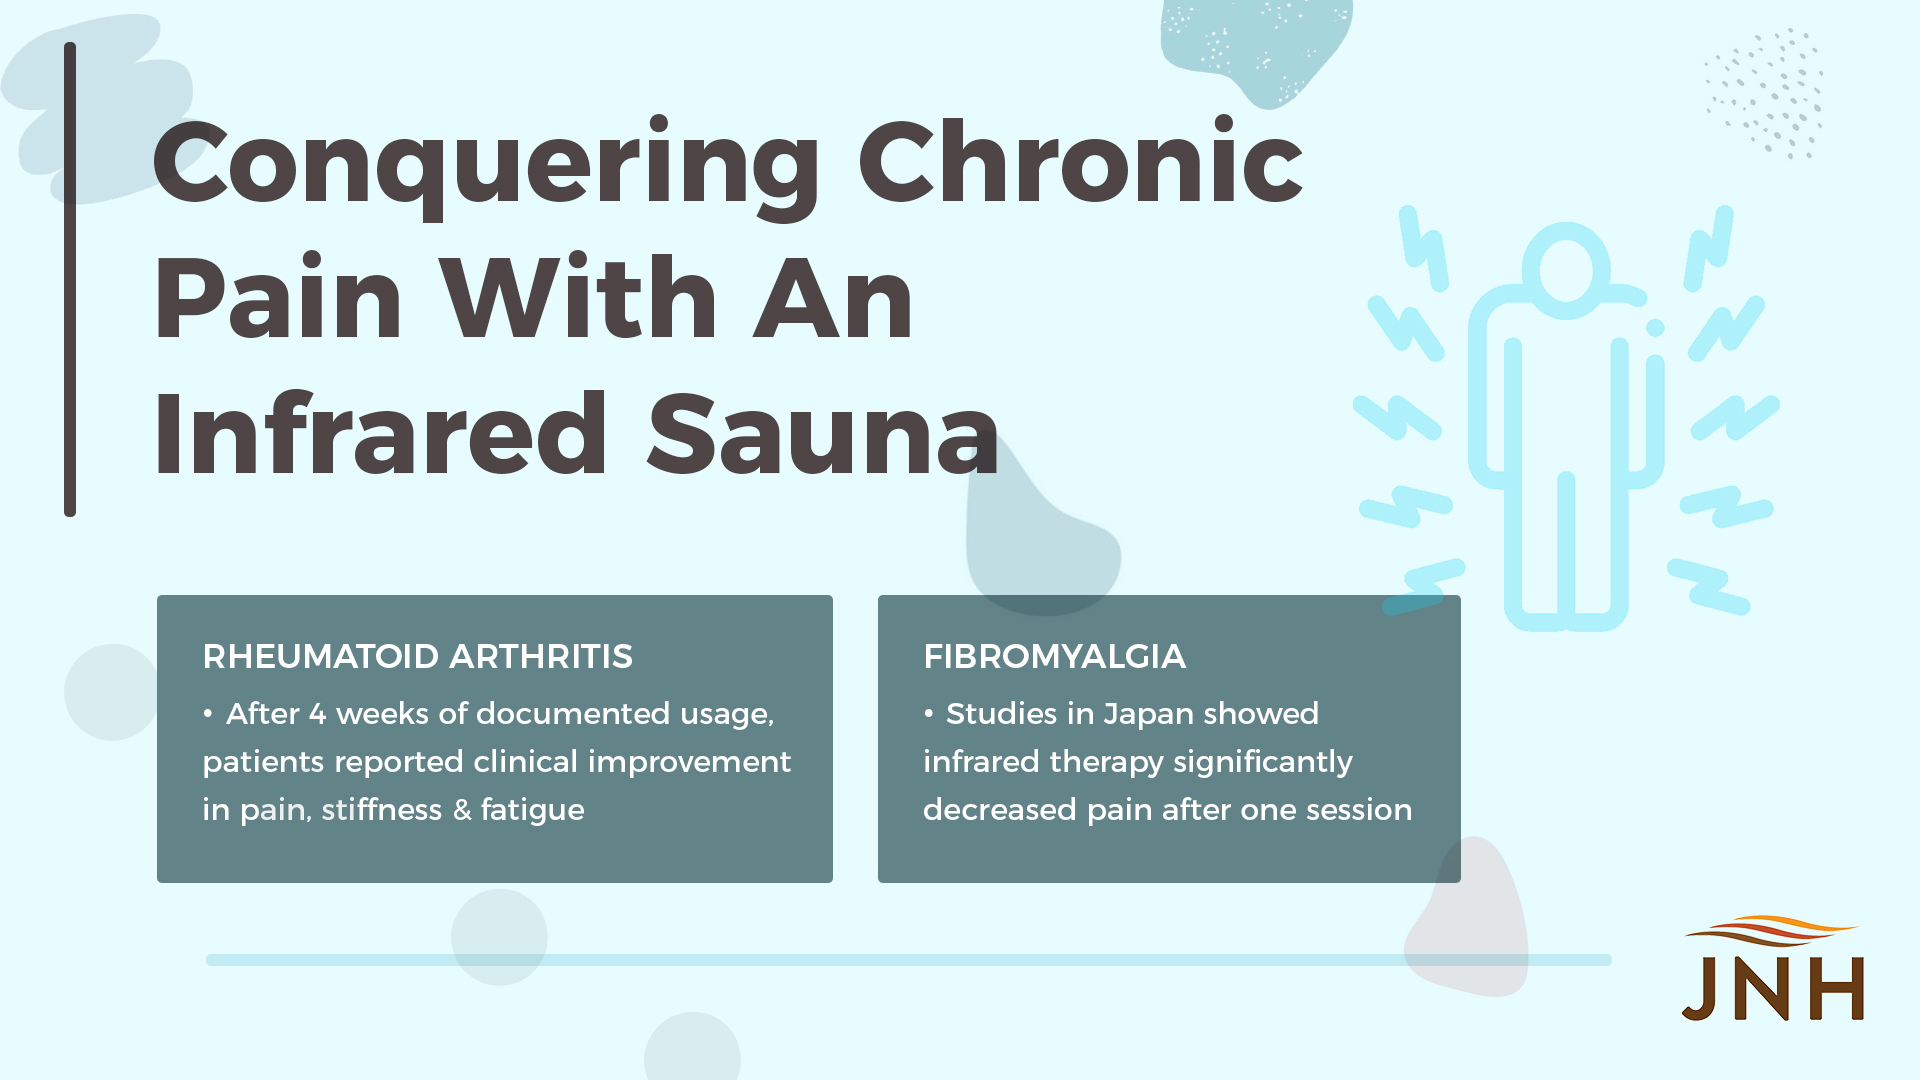 Conquering Chronic Pain With An Infrared Sauna -Rheumatoid Arthritis -After 4 weeks of documented usage, patients reported clinical improvement in pain, stiffness & fatigue -Fibromyalgia -Studies in Japan showed infrared therapy significantly decreased pain after one session